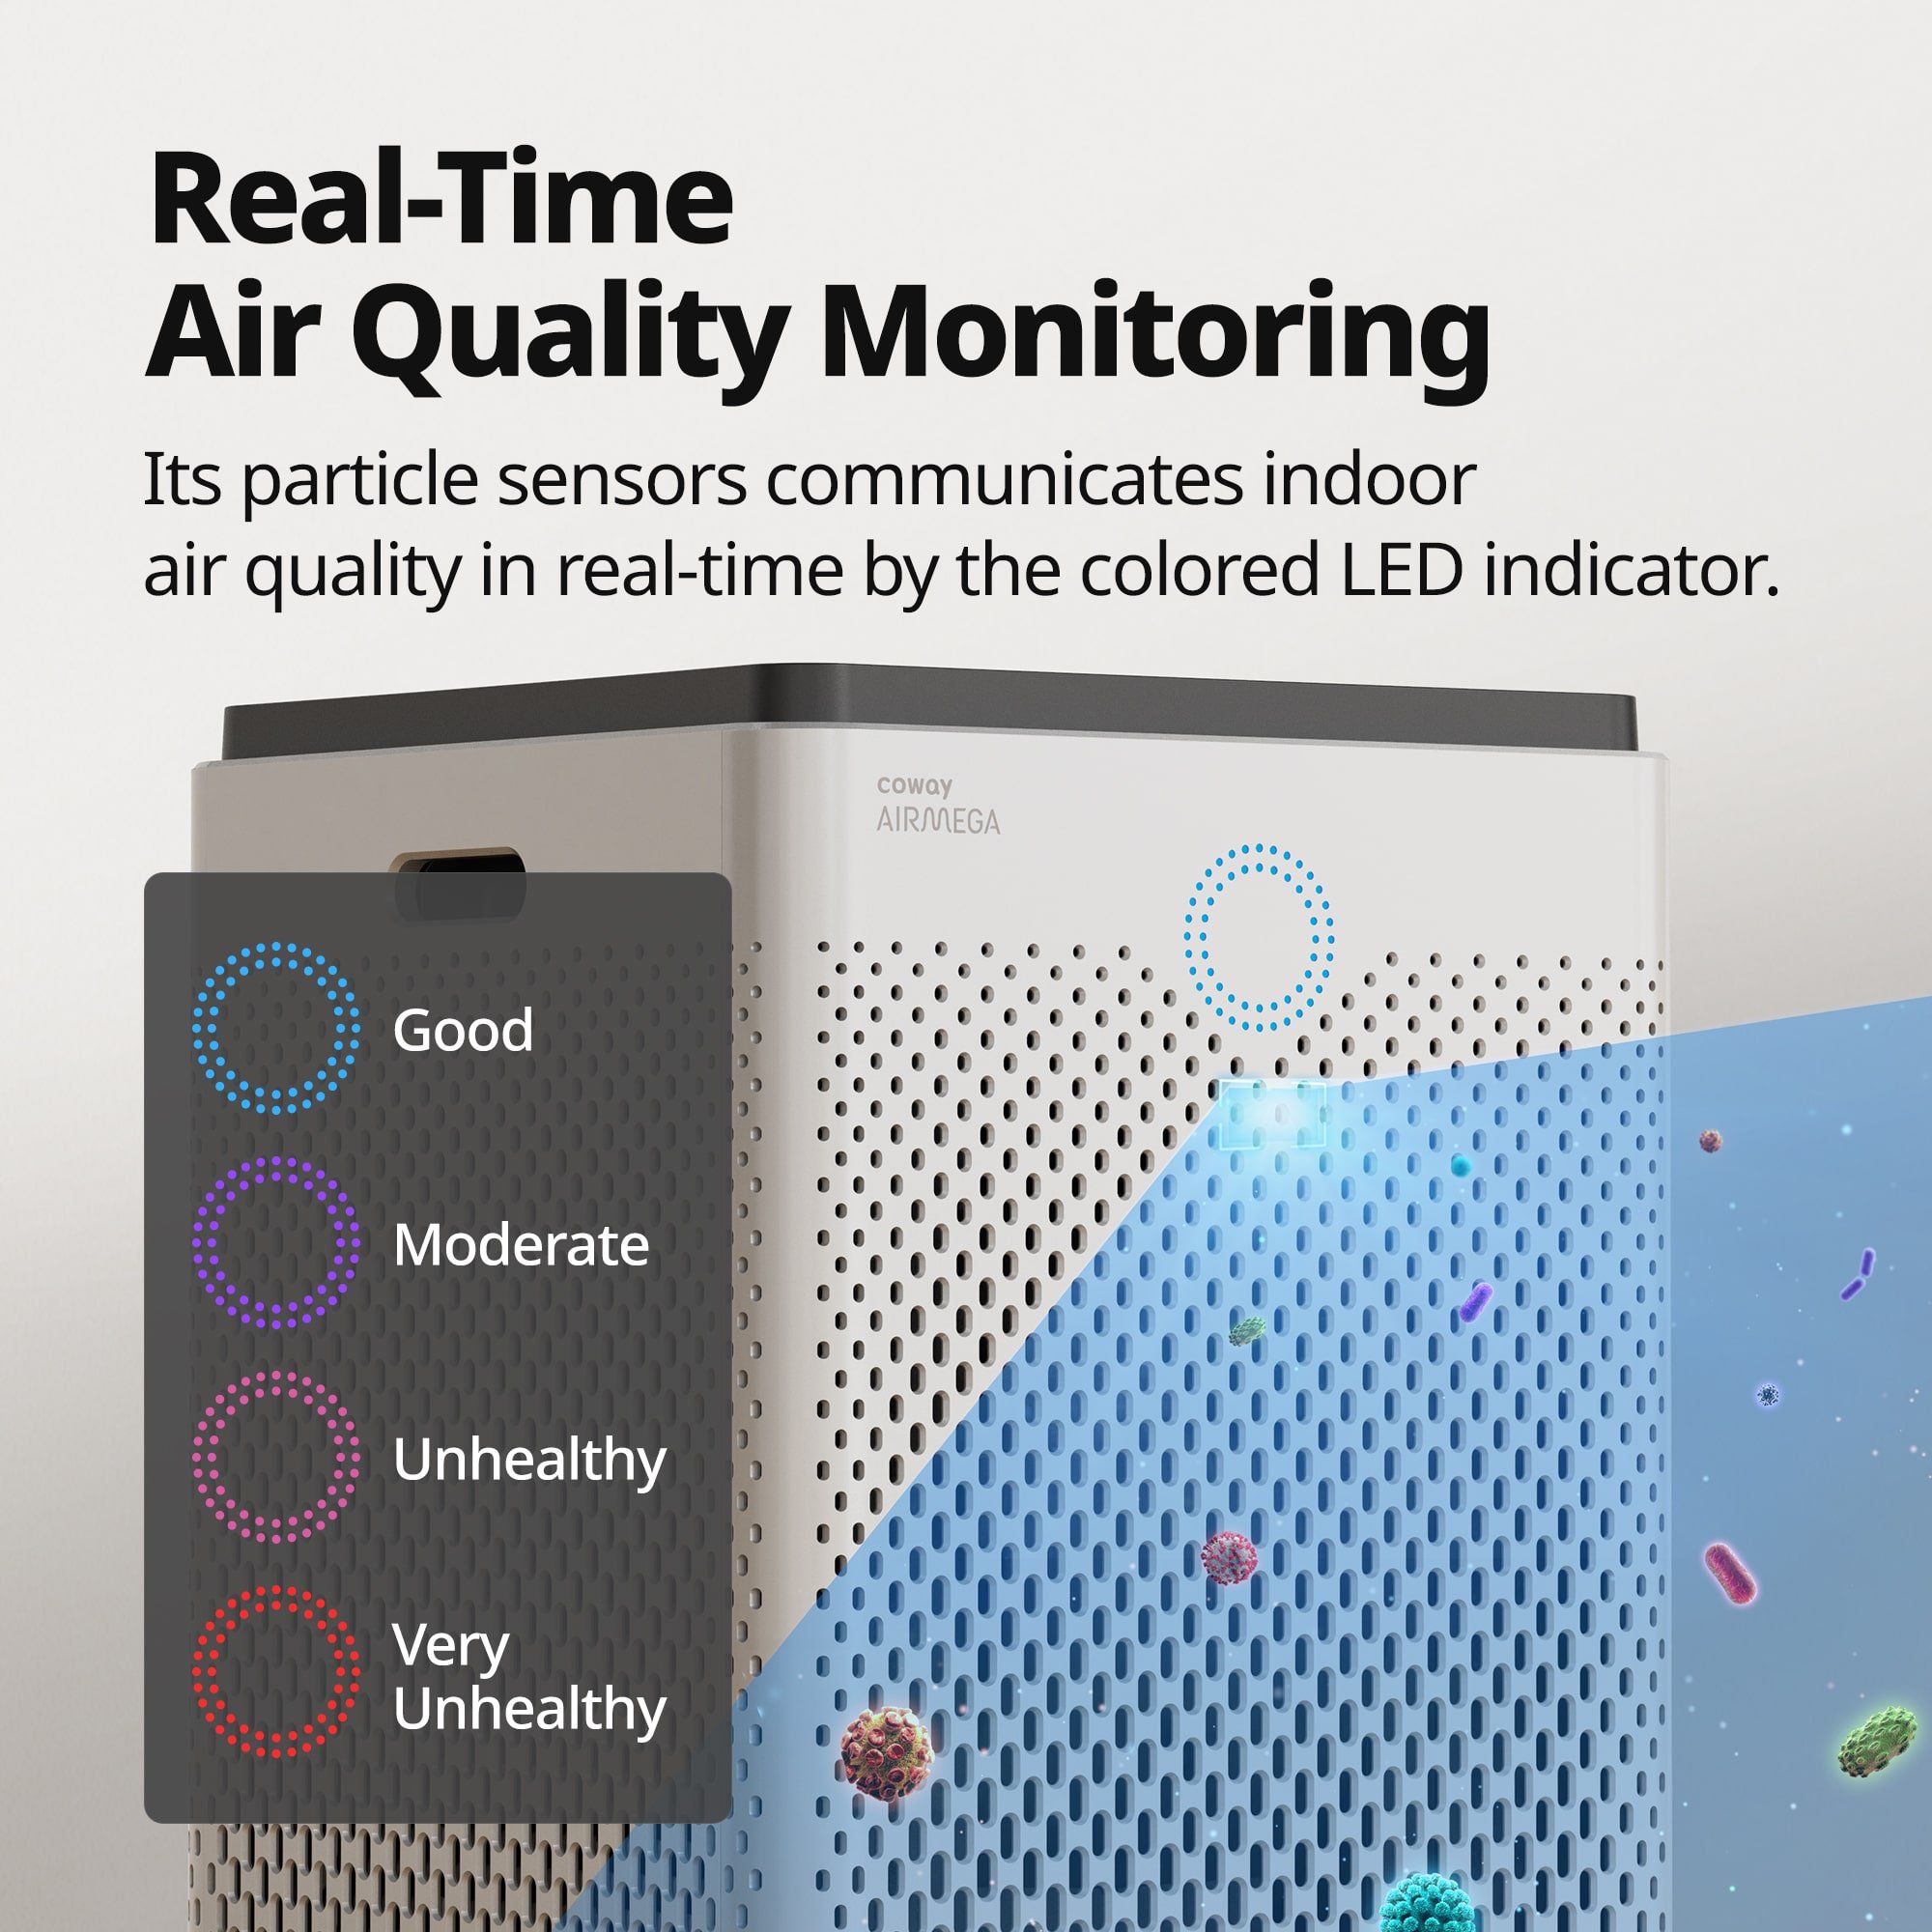 Real-Time Air Quality Monitoring